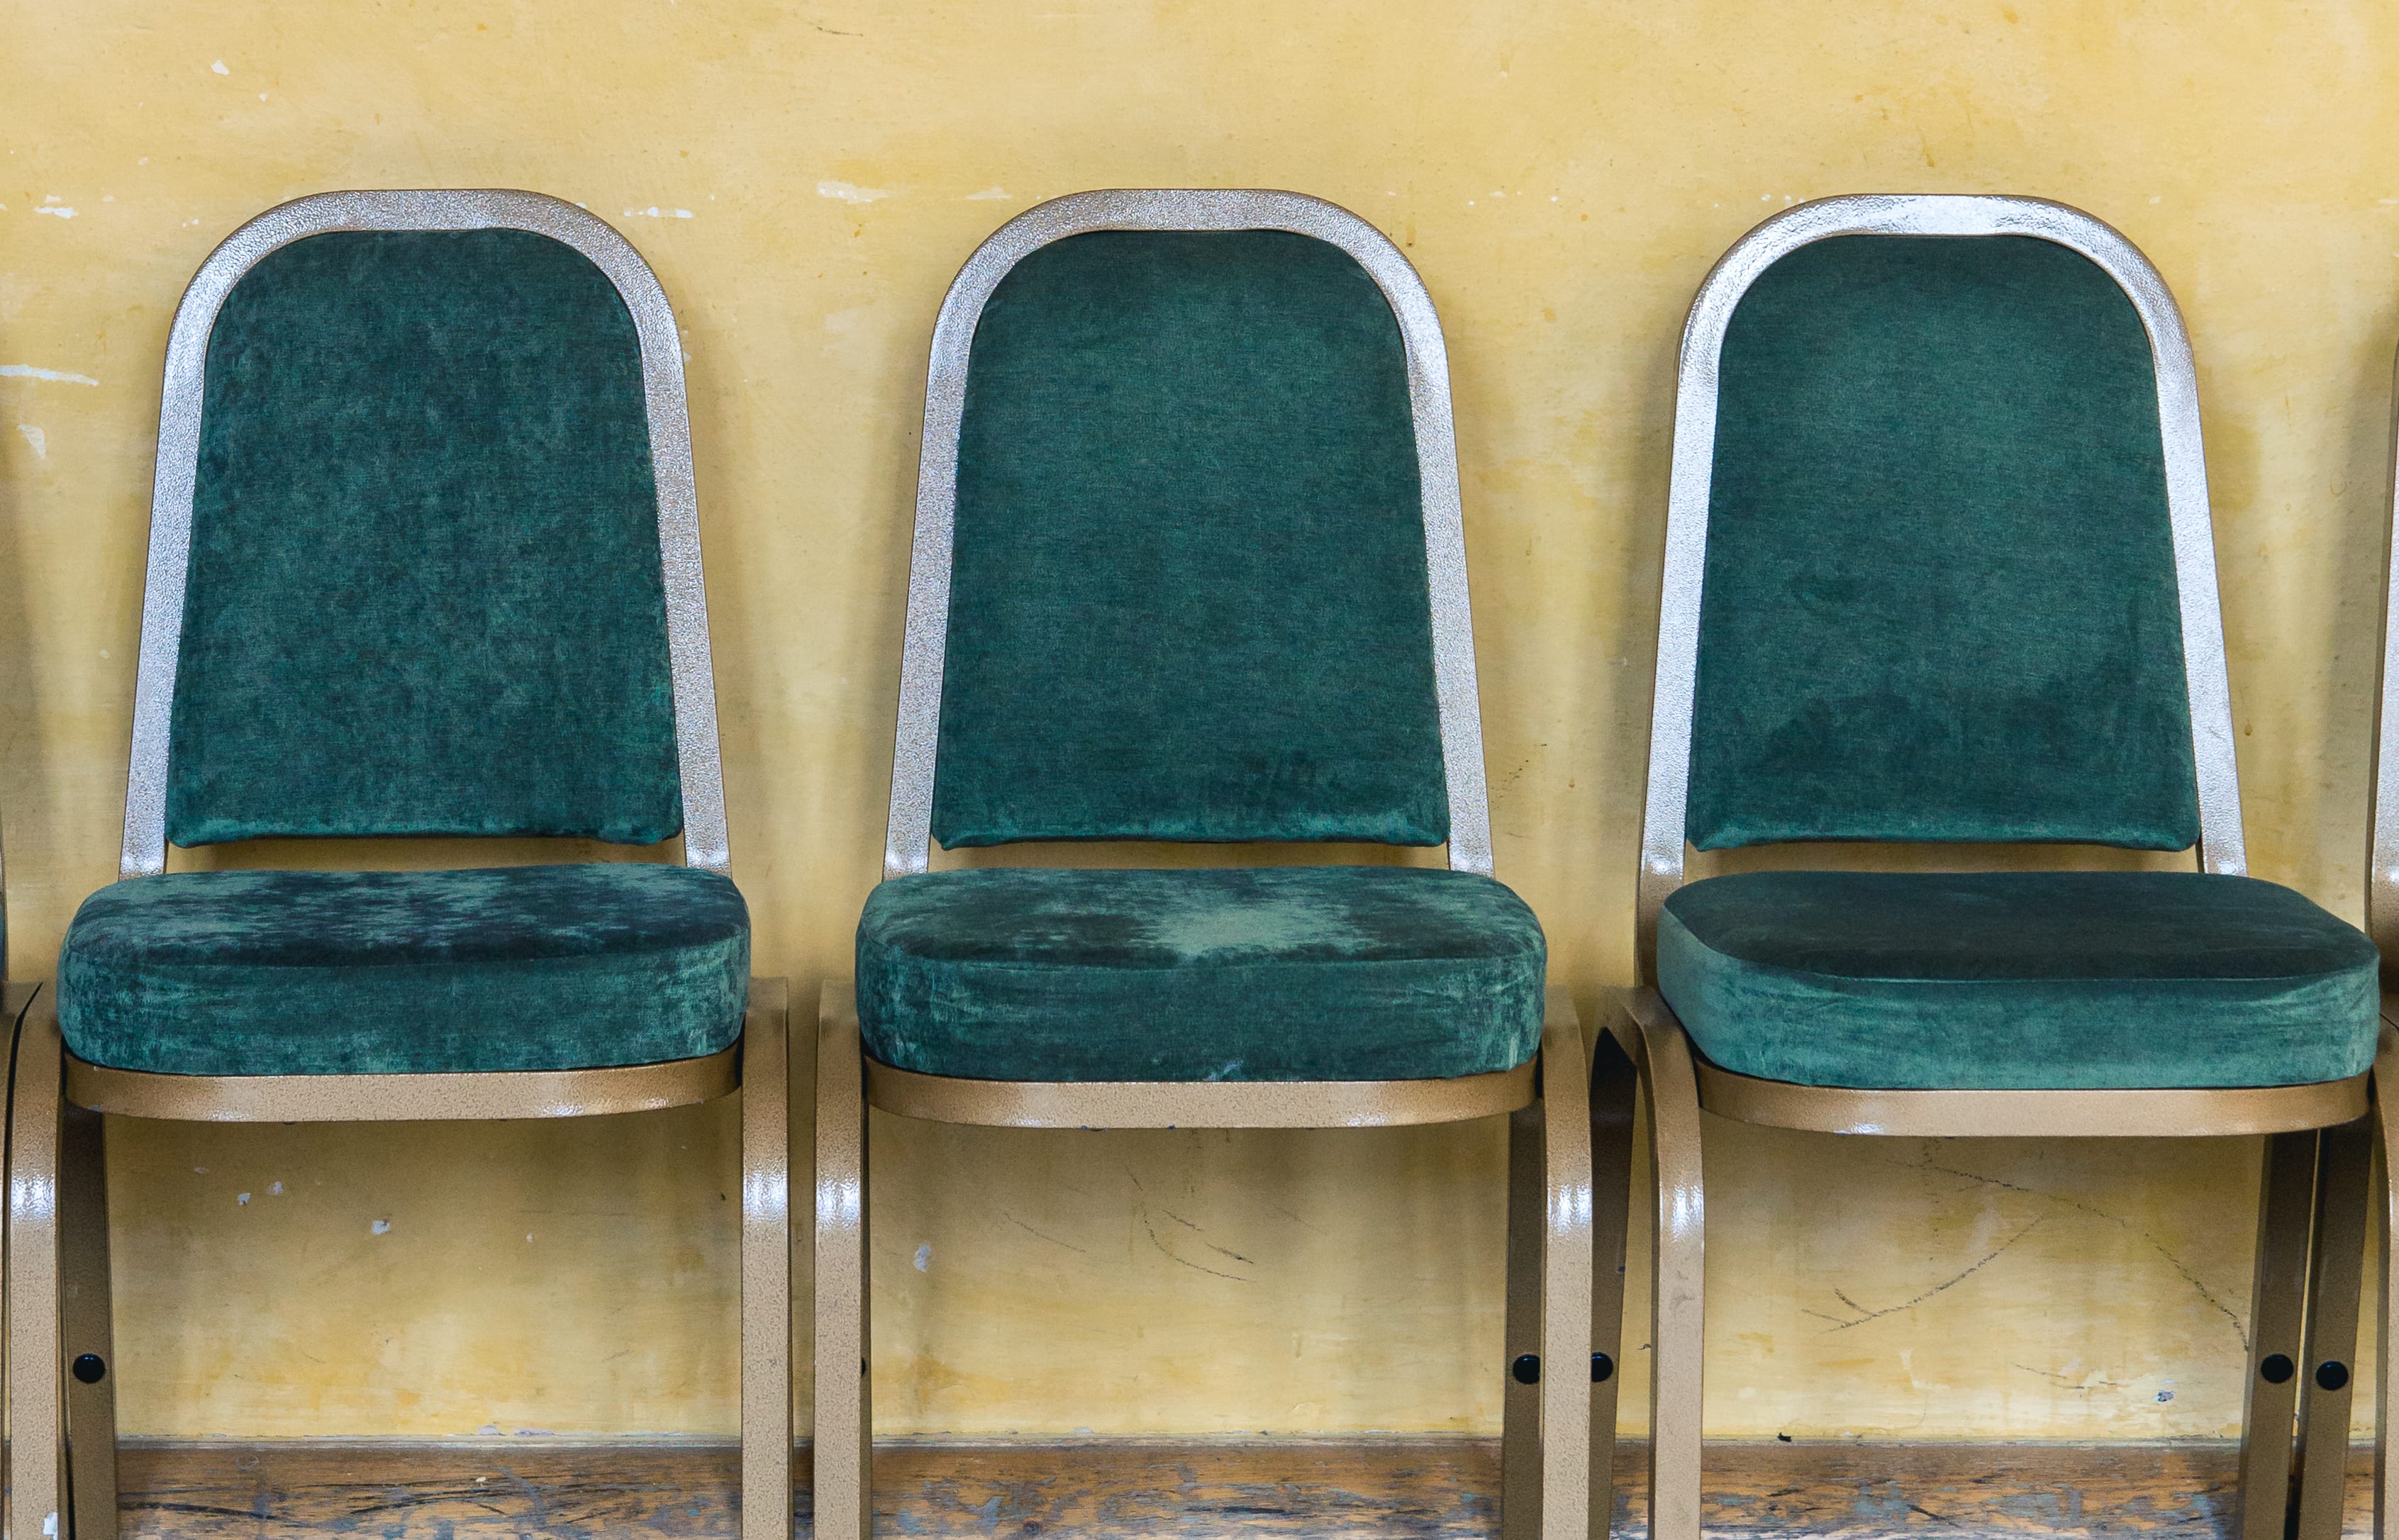 Green chairs lined up against a yellow wall in a waiting area